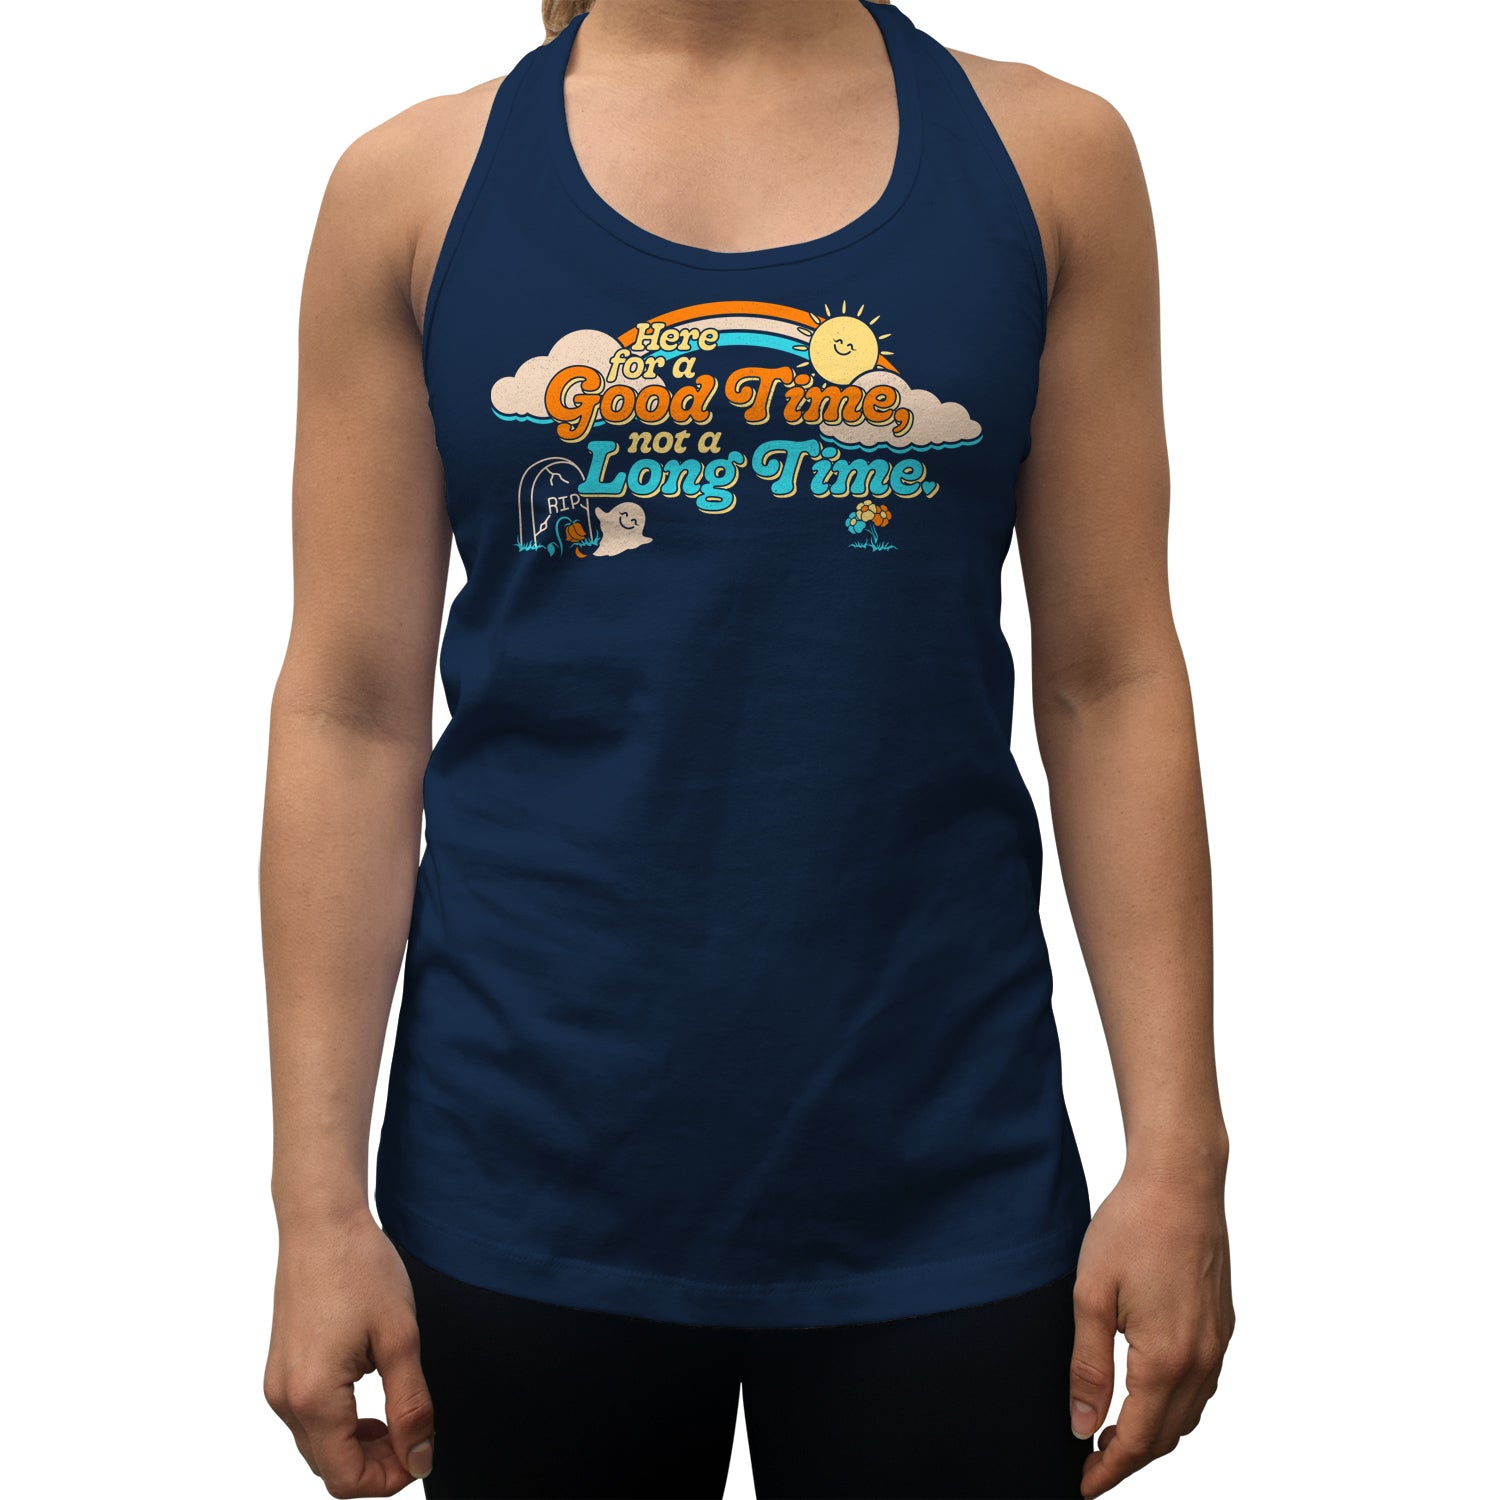 Women's Here for a Good Time Not a Long Time Racerback Tank Top